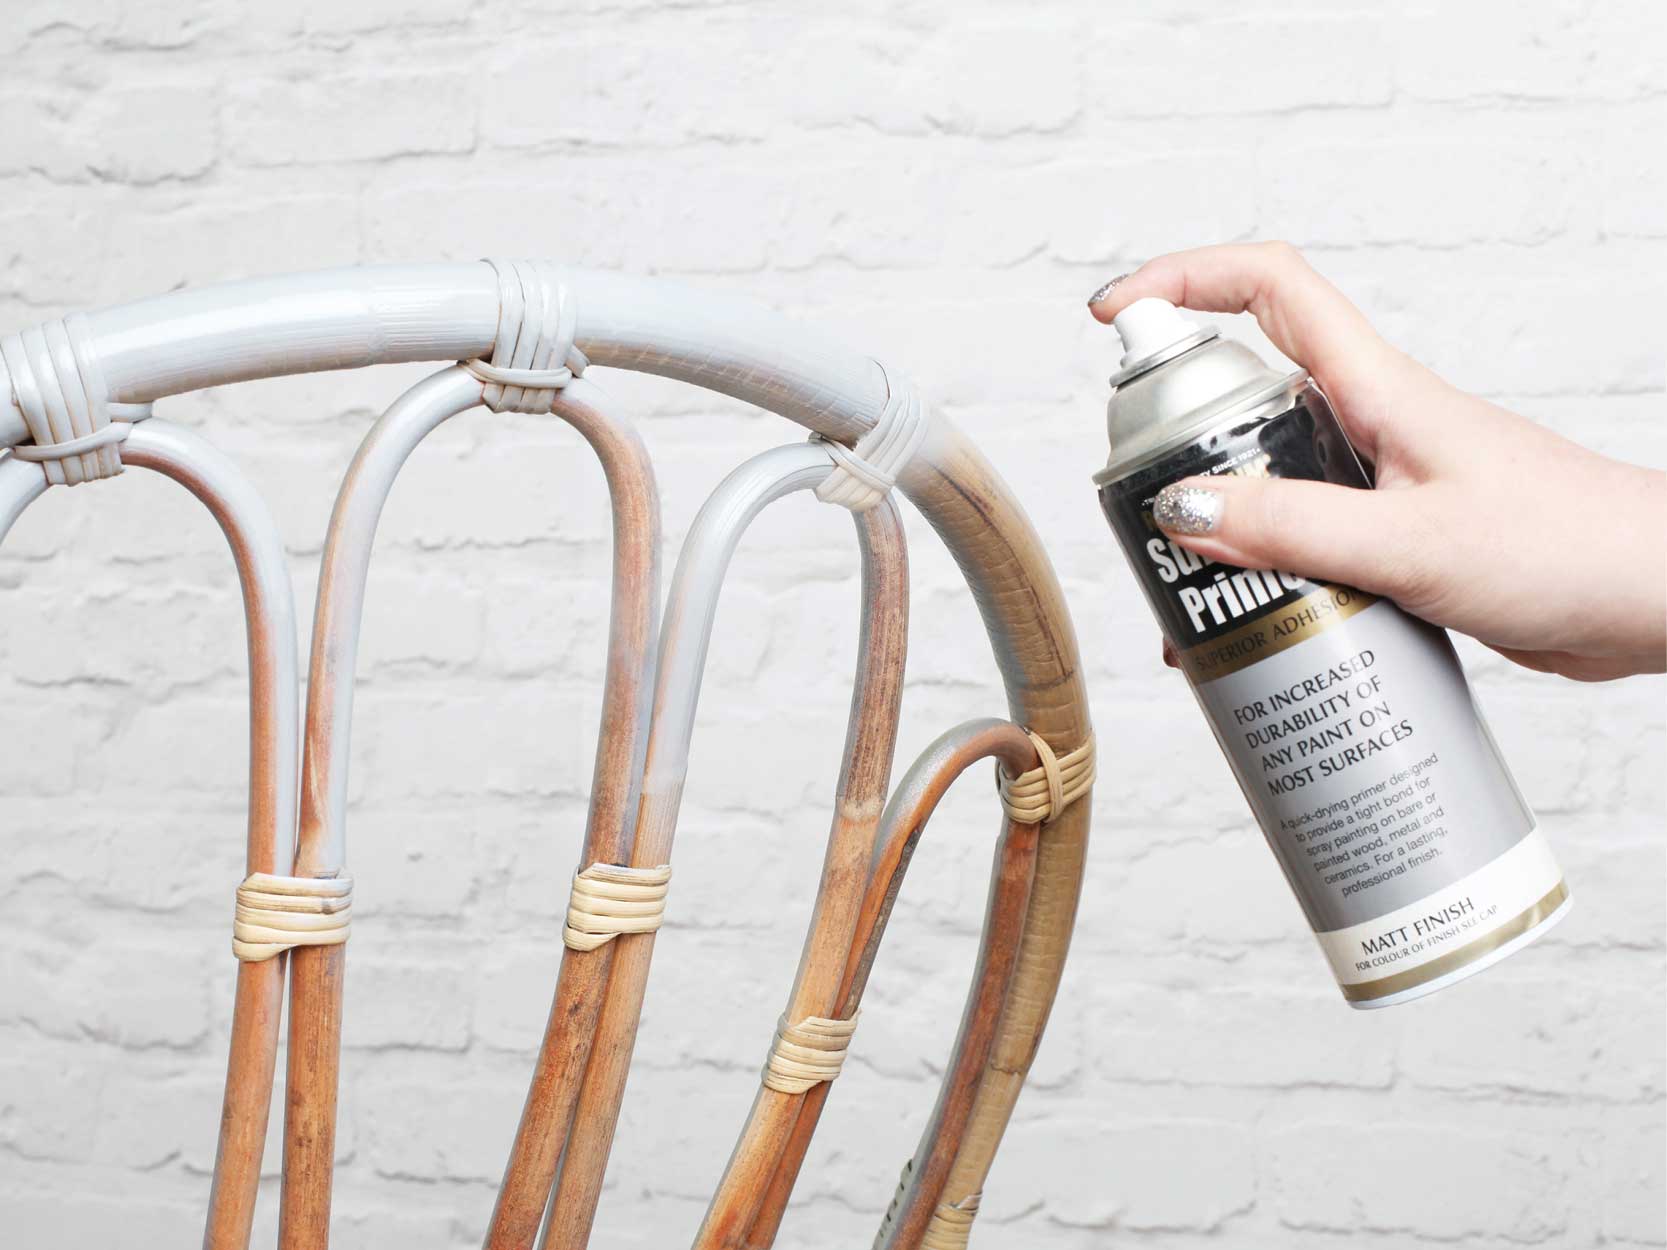 How to create a metallic white gold chair - Rustoleum Spray Paint